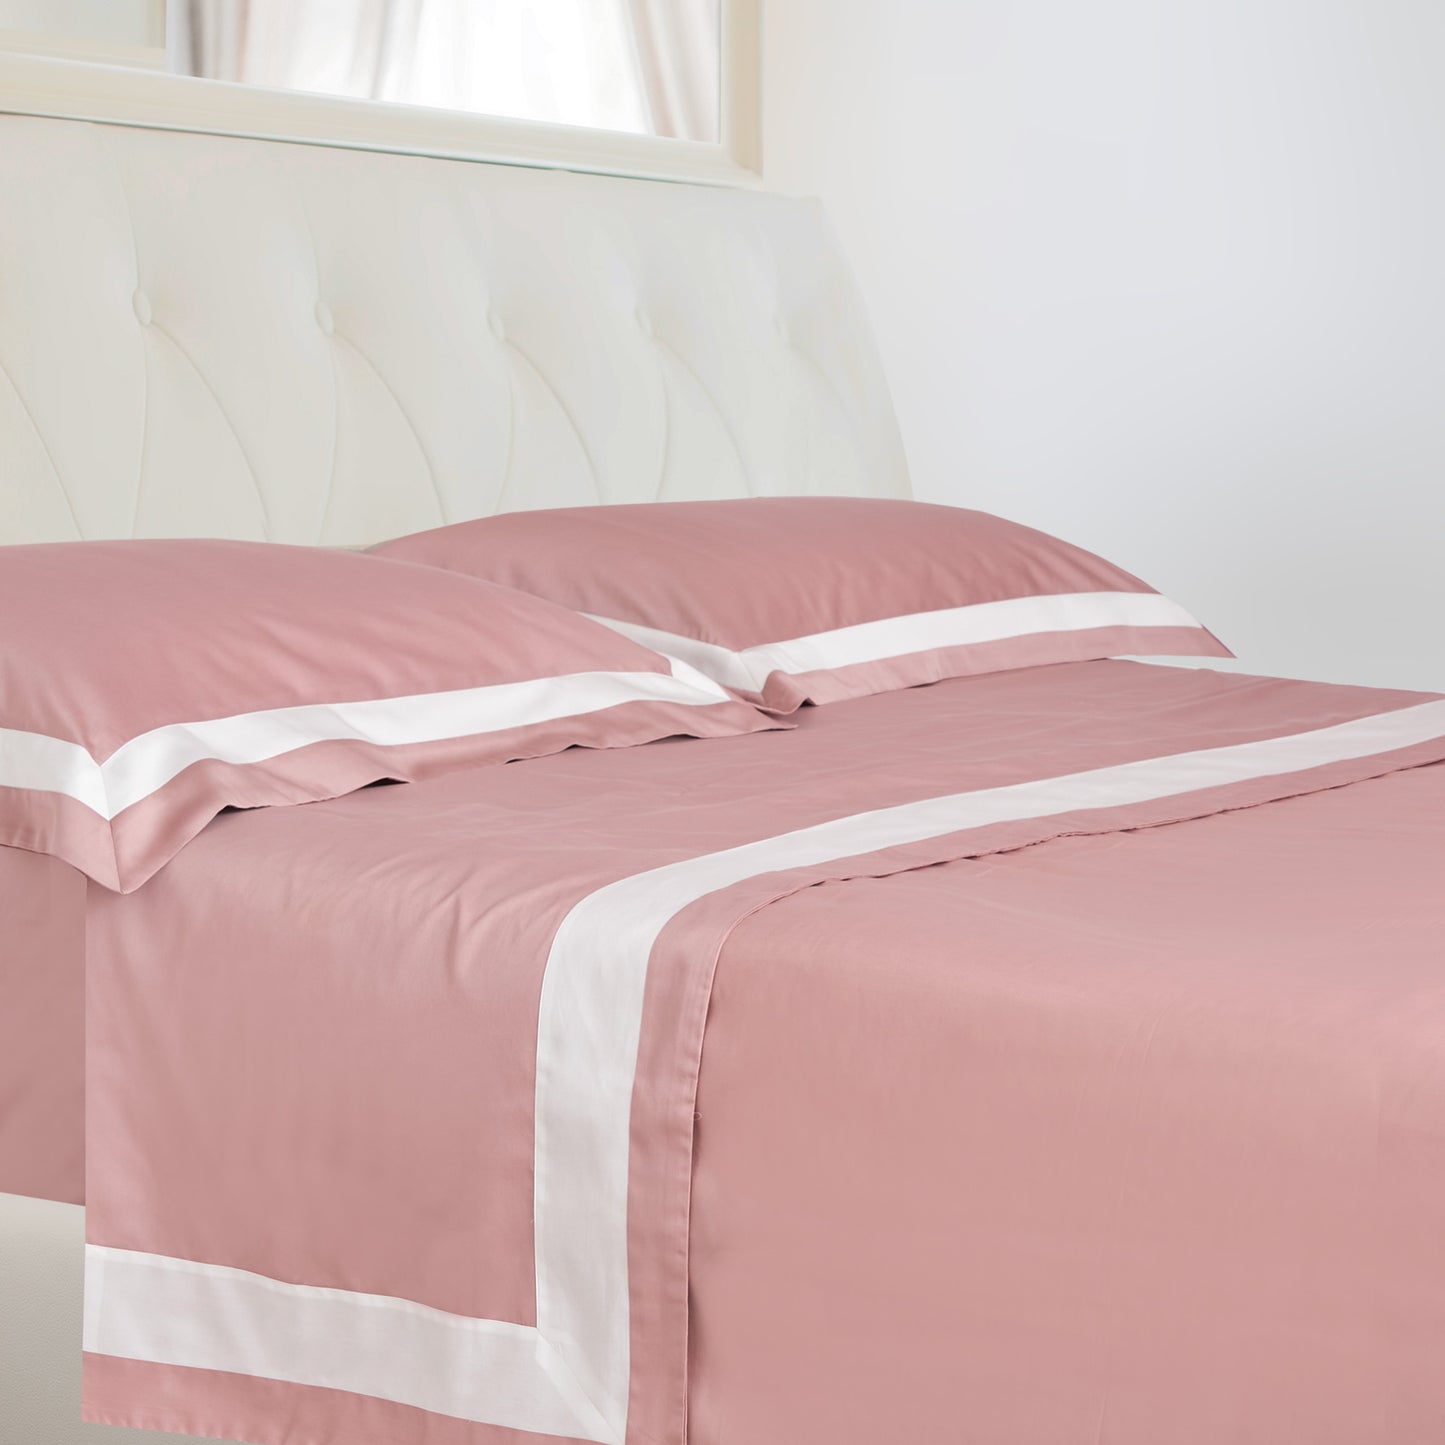 300TC Cotton Satin Sheet Set with Contrasting Border - Arch